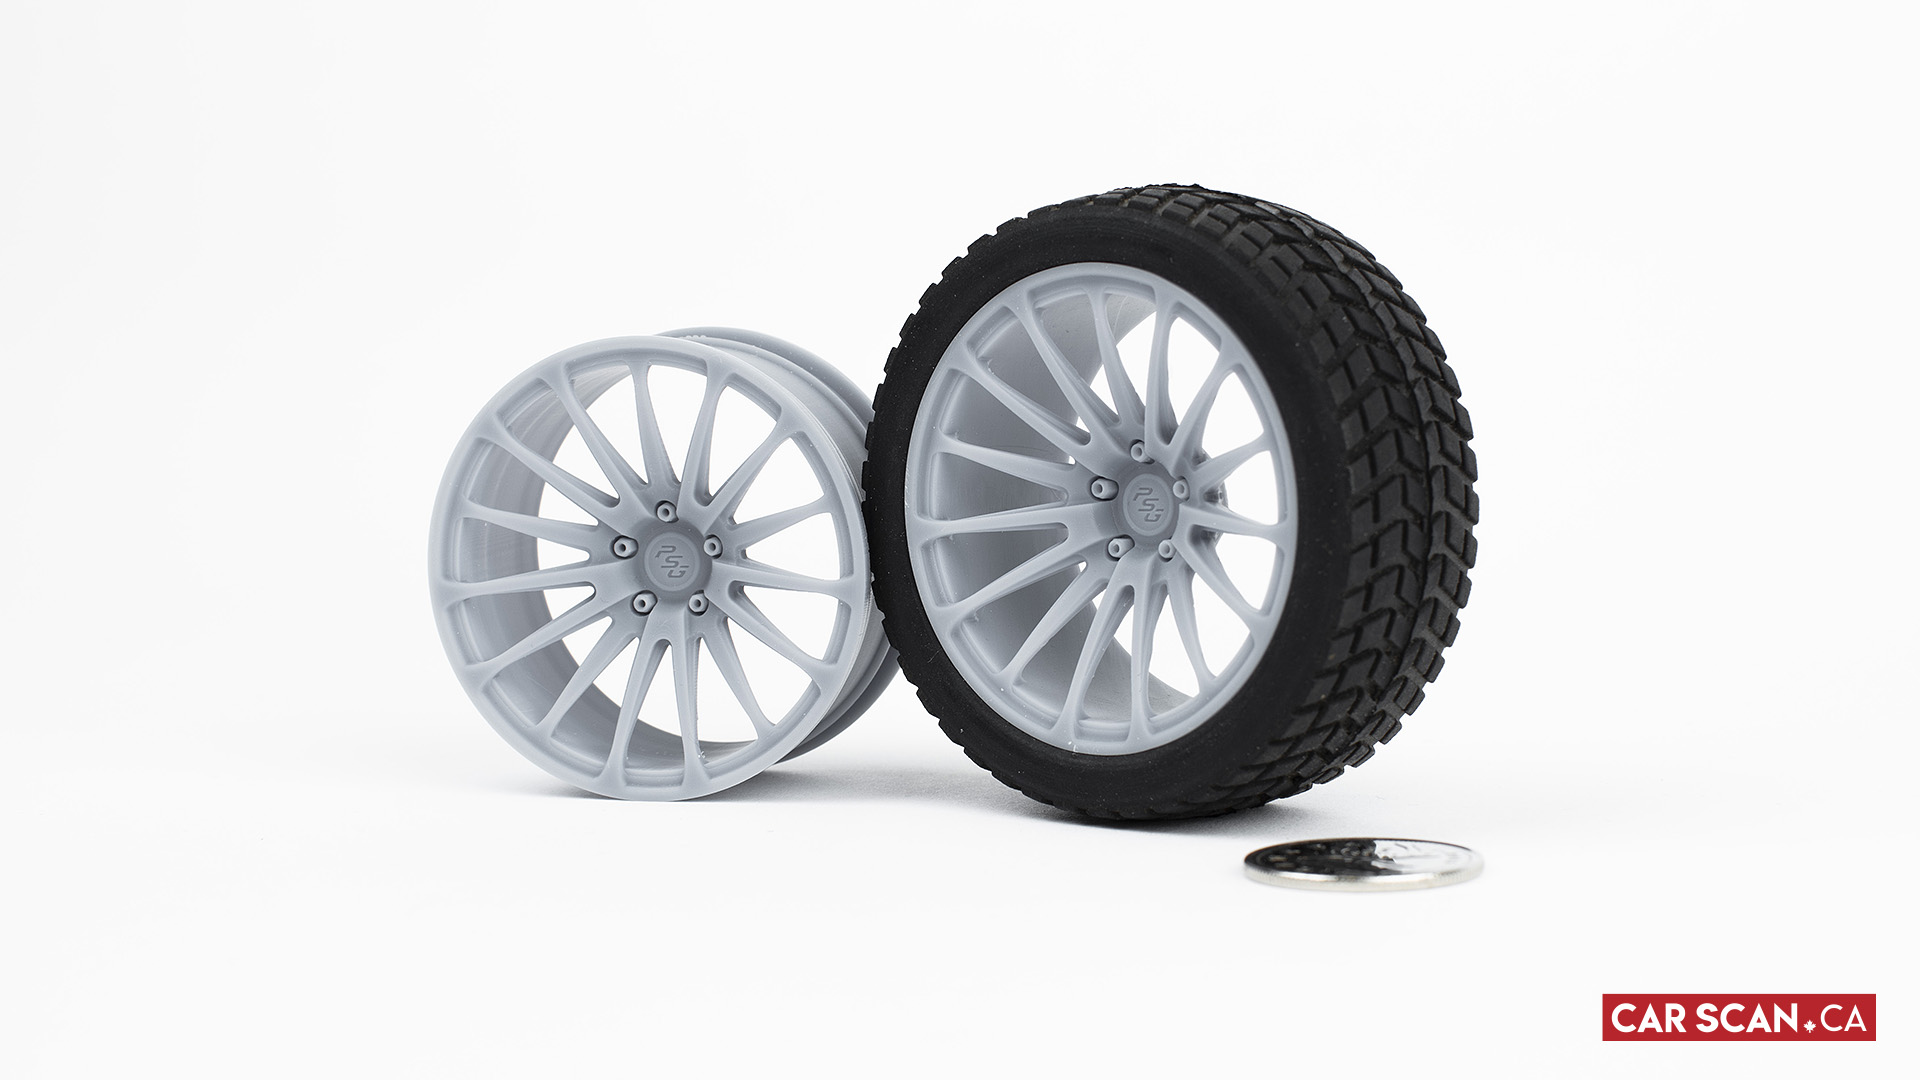 CarScan.ca Rapid Prototyping 3D Printed RC Scale Wheels